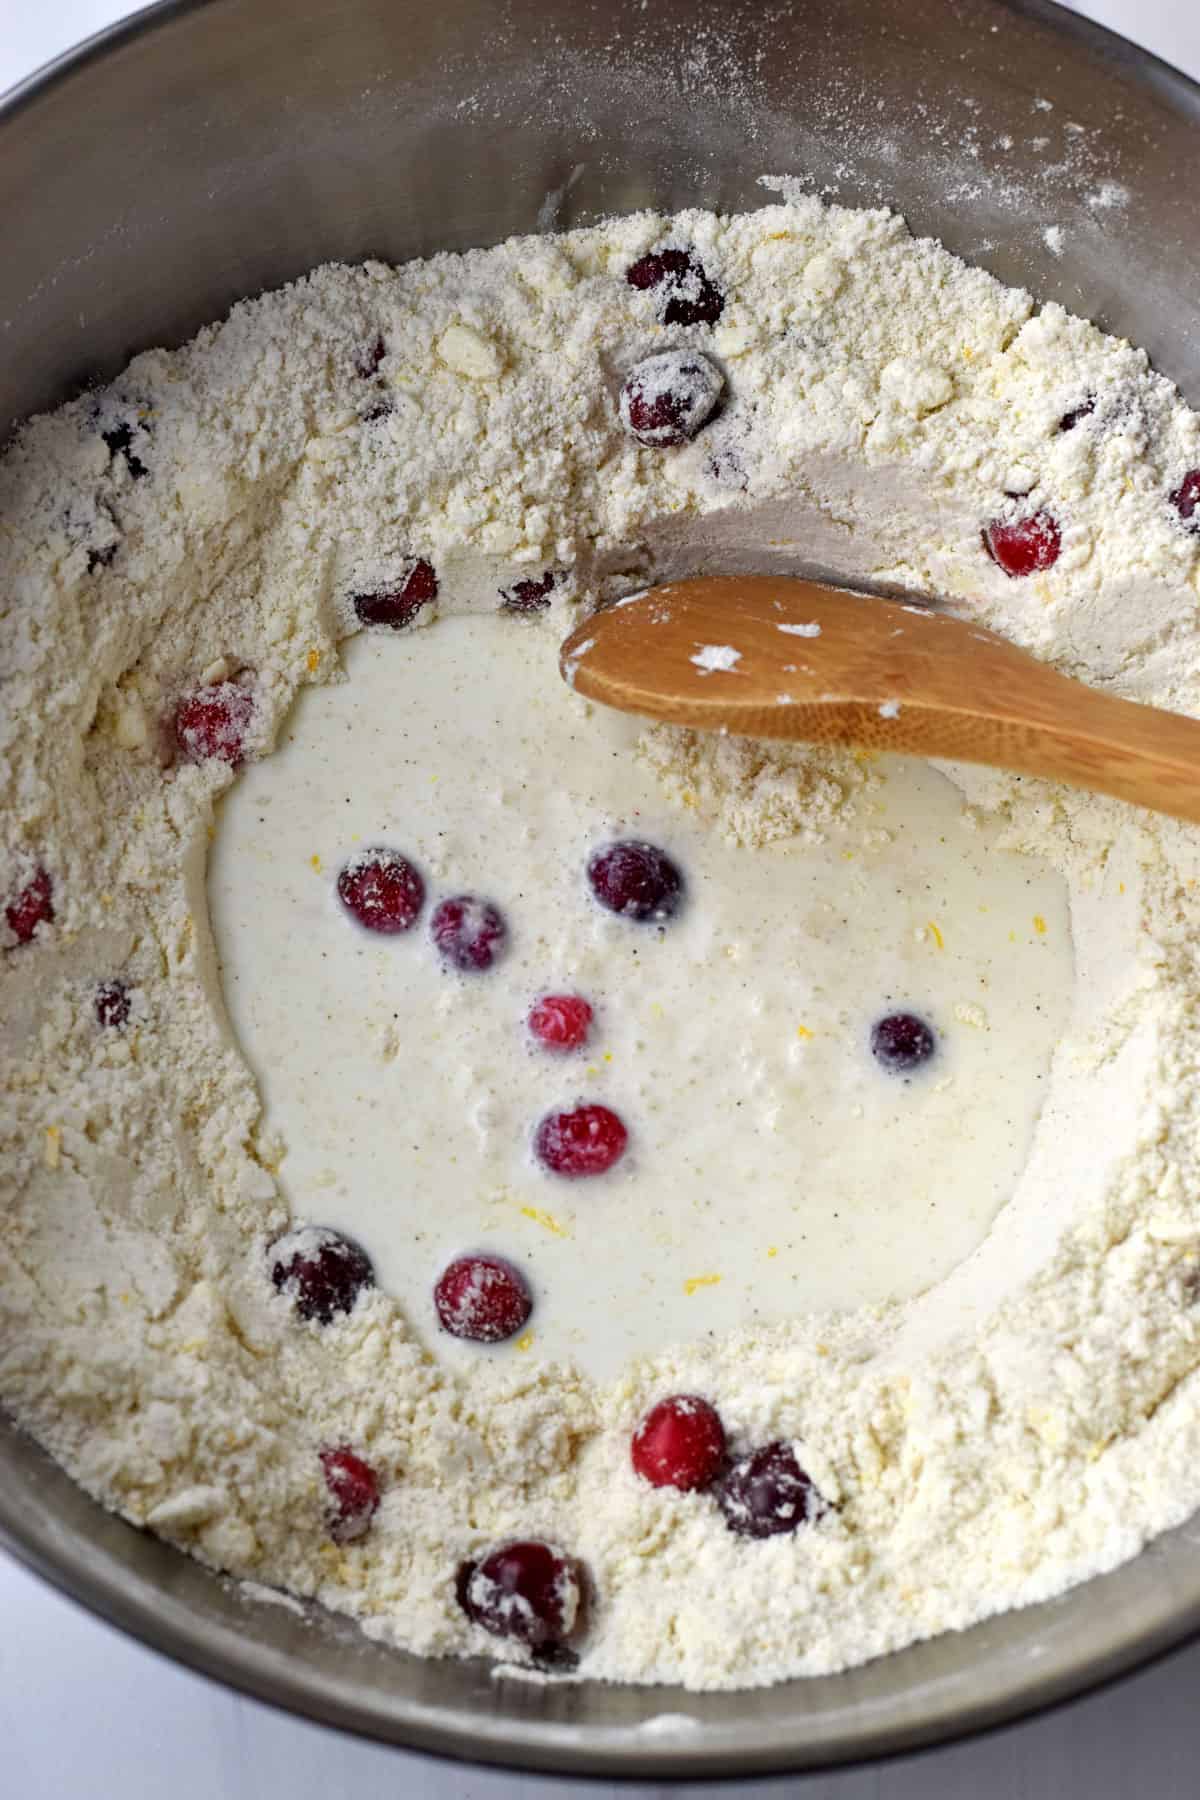 Wet ingredients and fresh cranberries being stirred into flour/butter mixture with a wooden spoon.